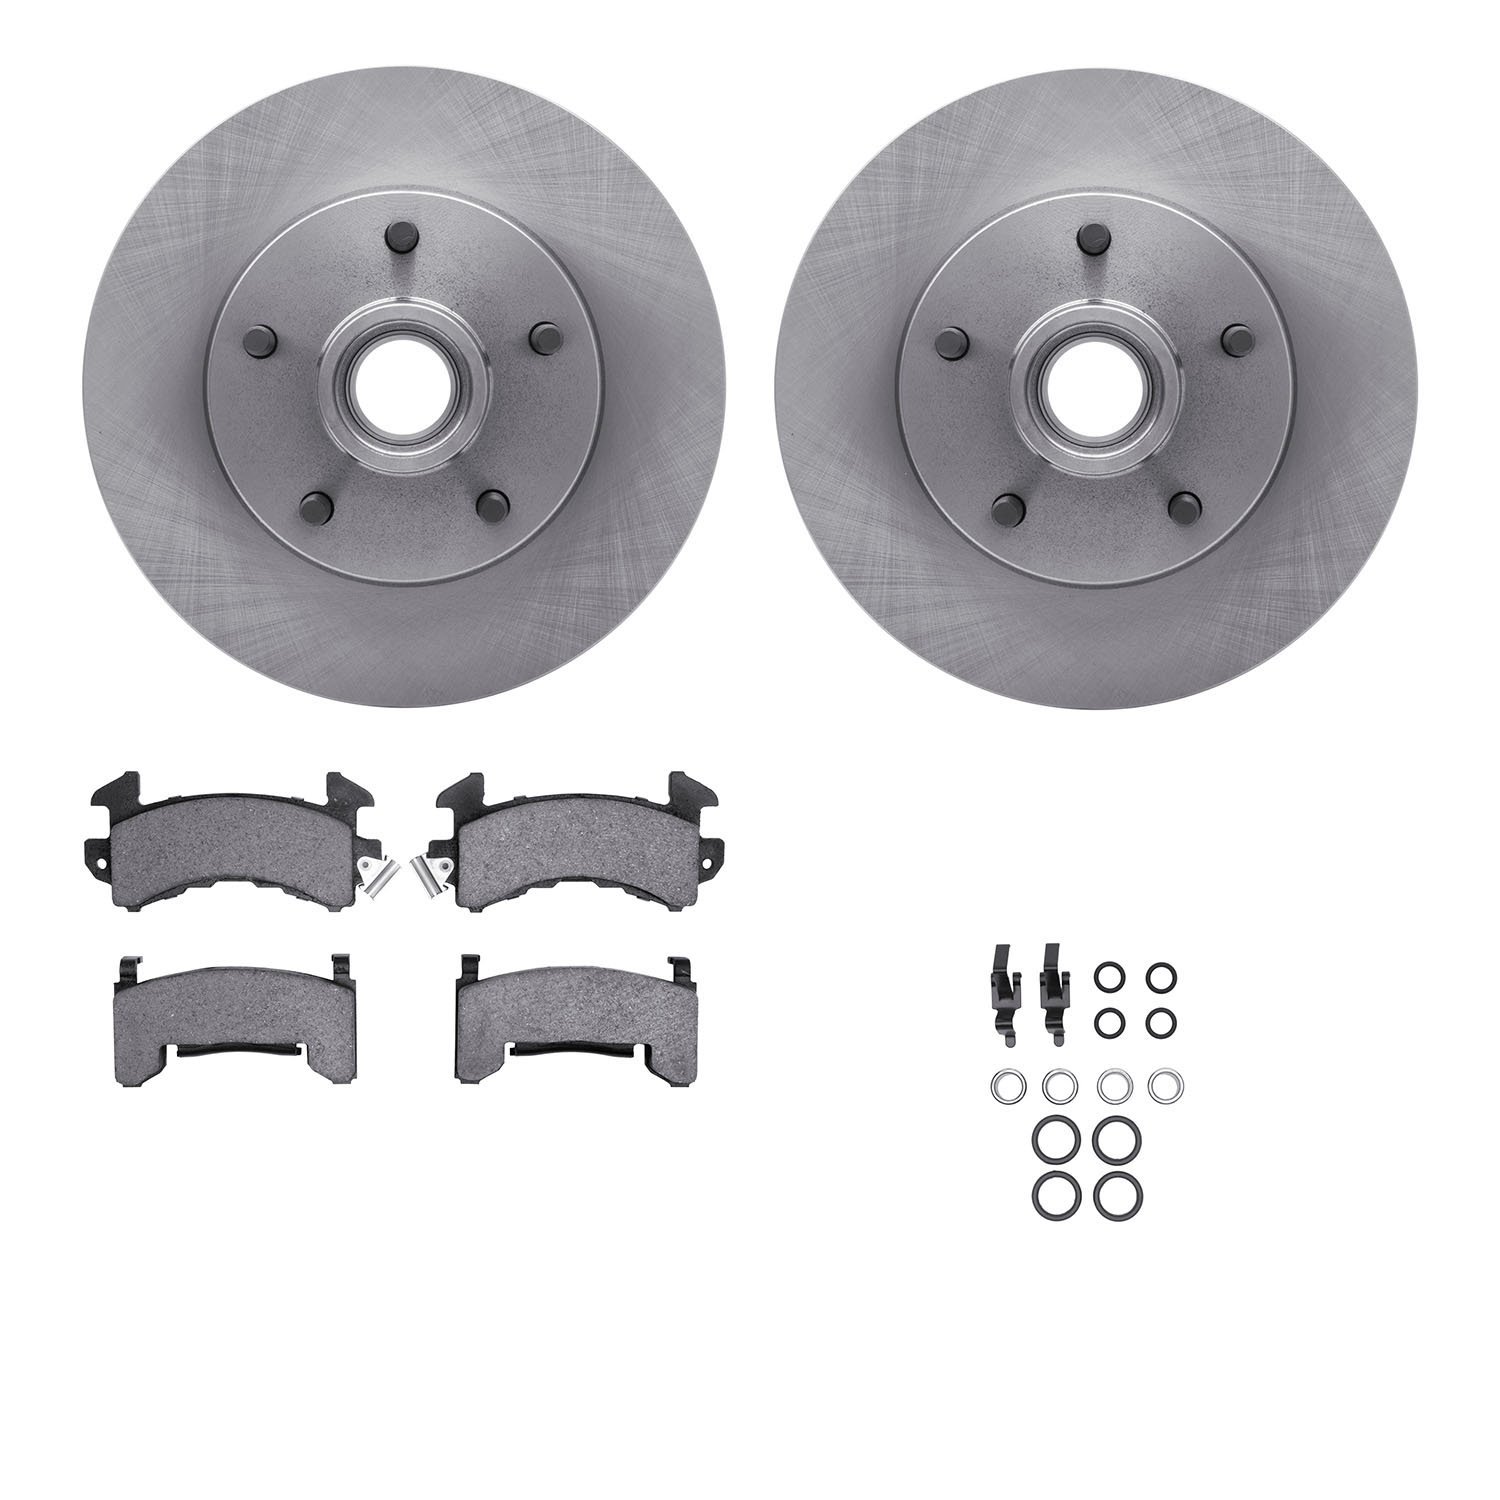 6412-47031 Brake Rotors with Ultimate-Duty Brake Pads Kit & Hardware, 1982-1995 GM, Position: Front